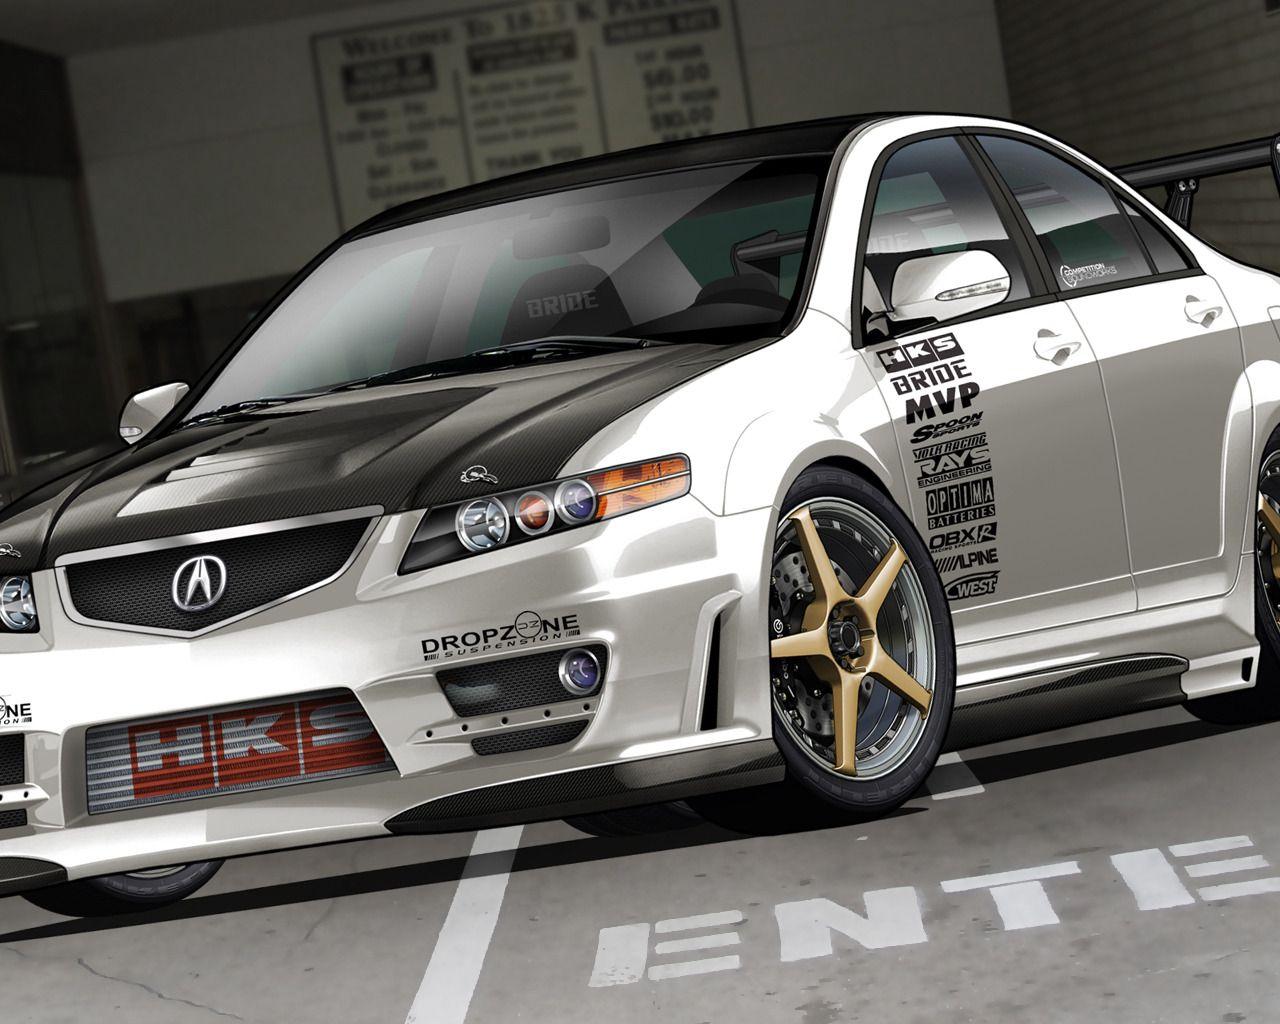 Image for Acura Tsx Wallpaper. Acura Cars. Cars, Acura